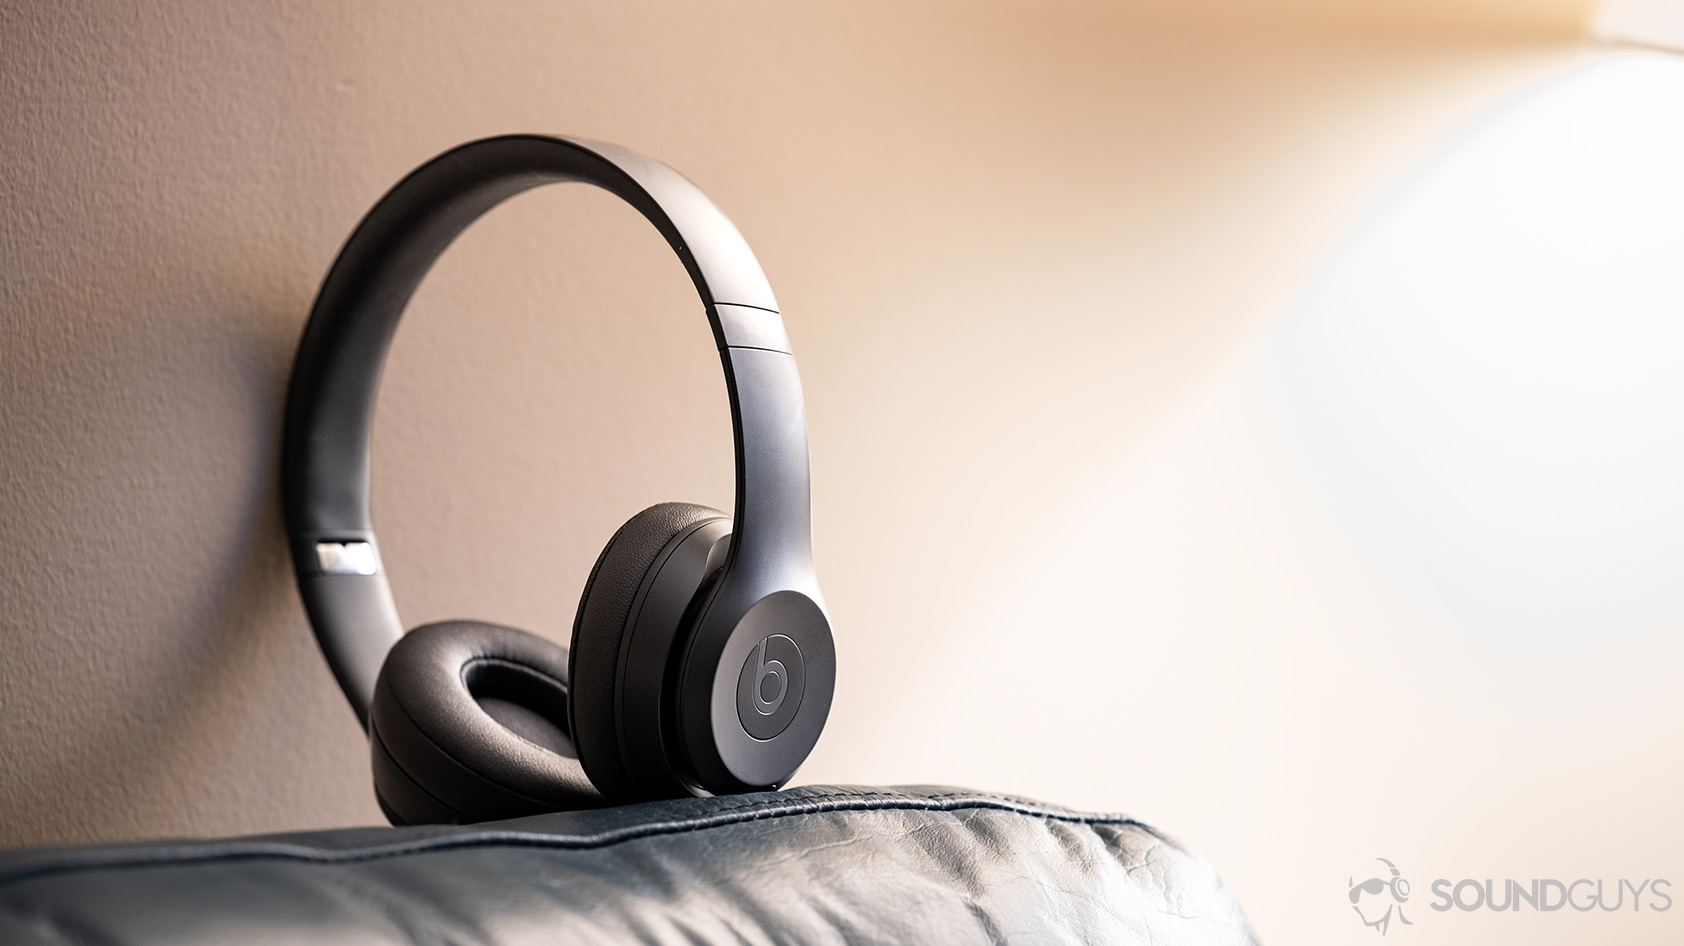 The Beats Solo3 Wireless headphones standing on a couch against a warm-tinted wall.